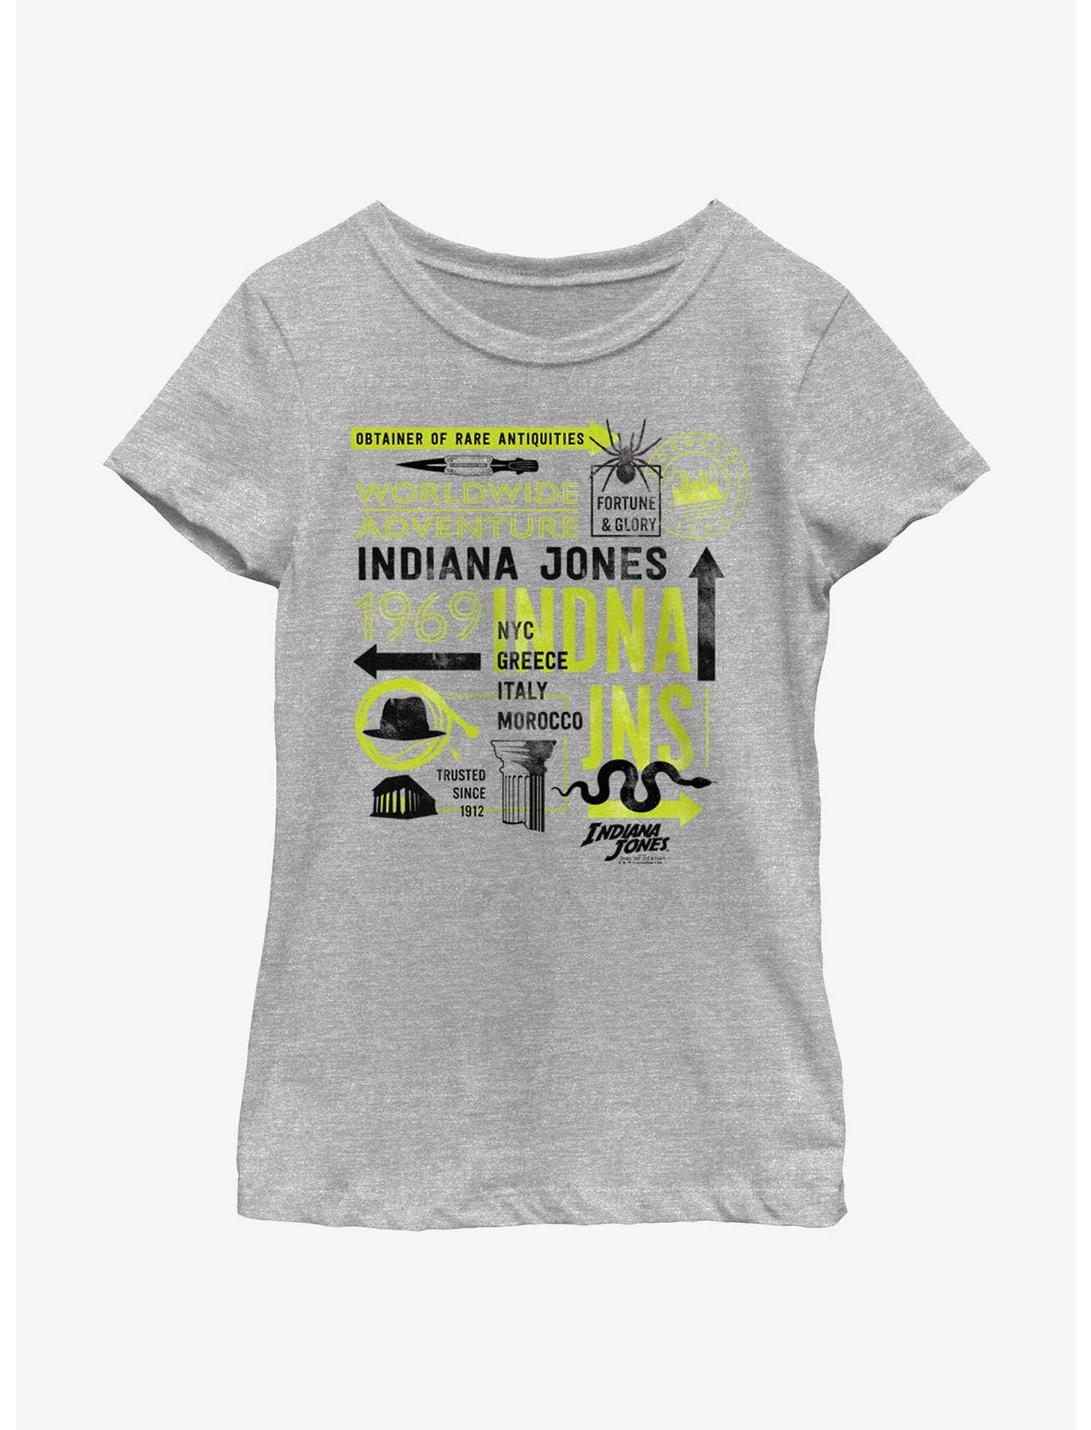 Indiana Jones and the Dial of Destiny Passport Infographic Girls Youth T-Shirt, ATH HTR, hi-res